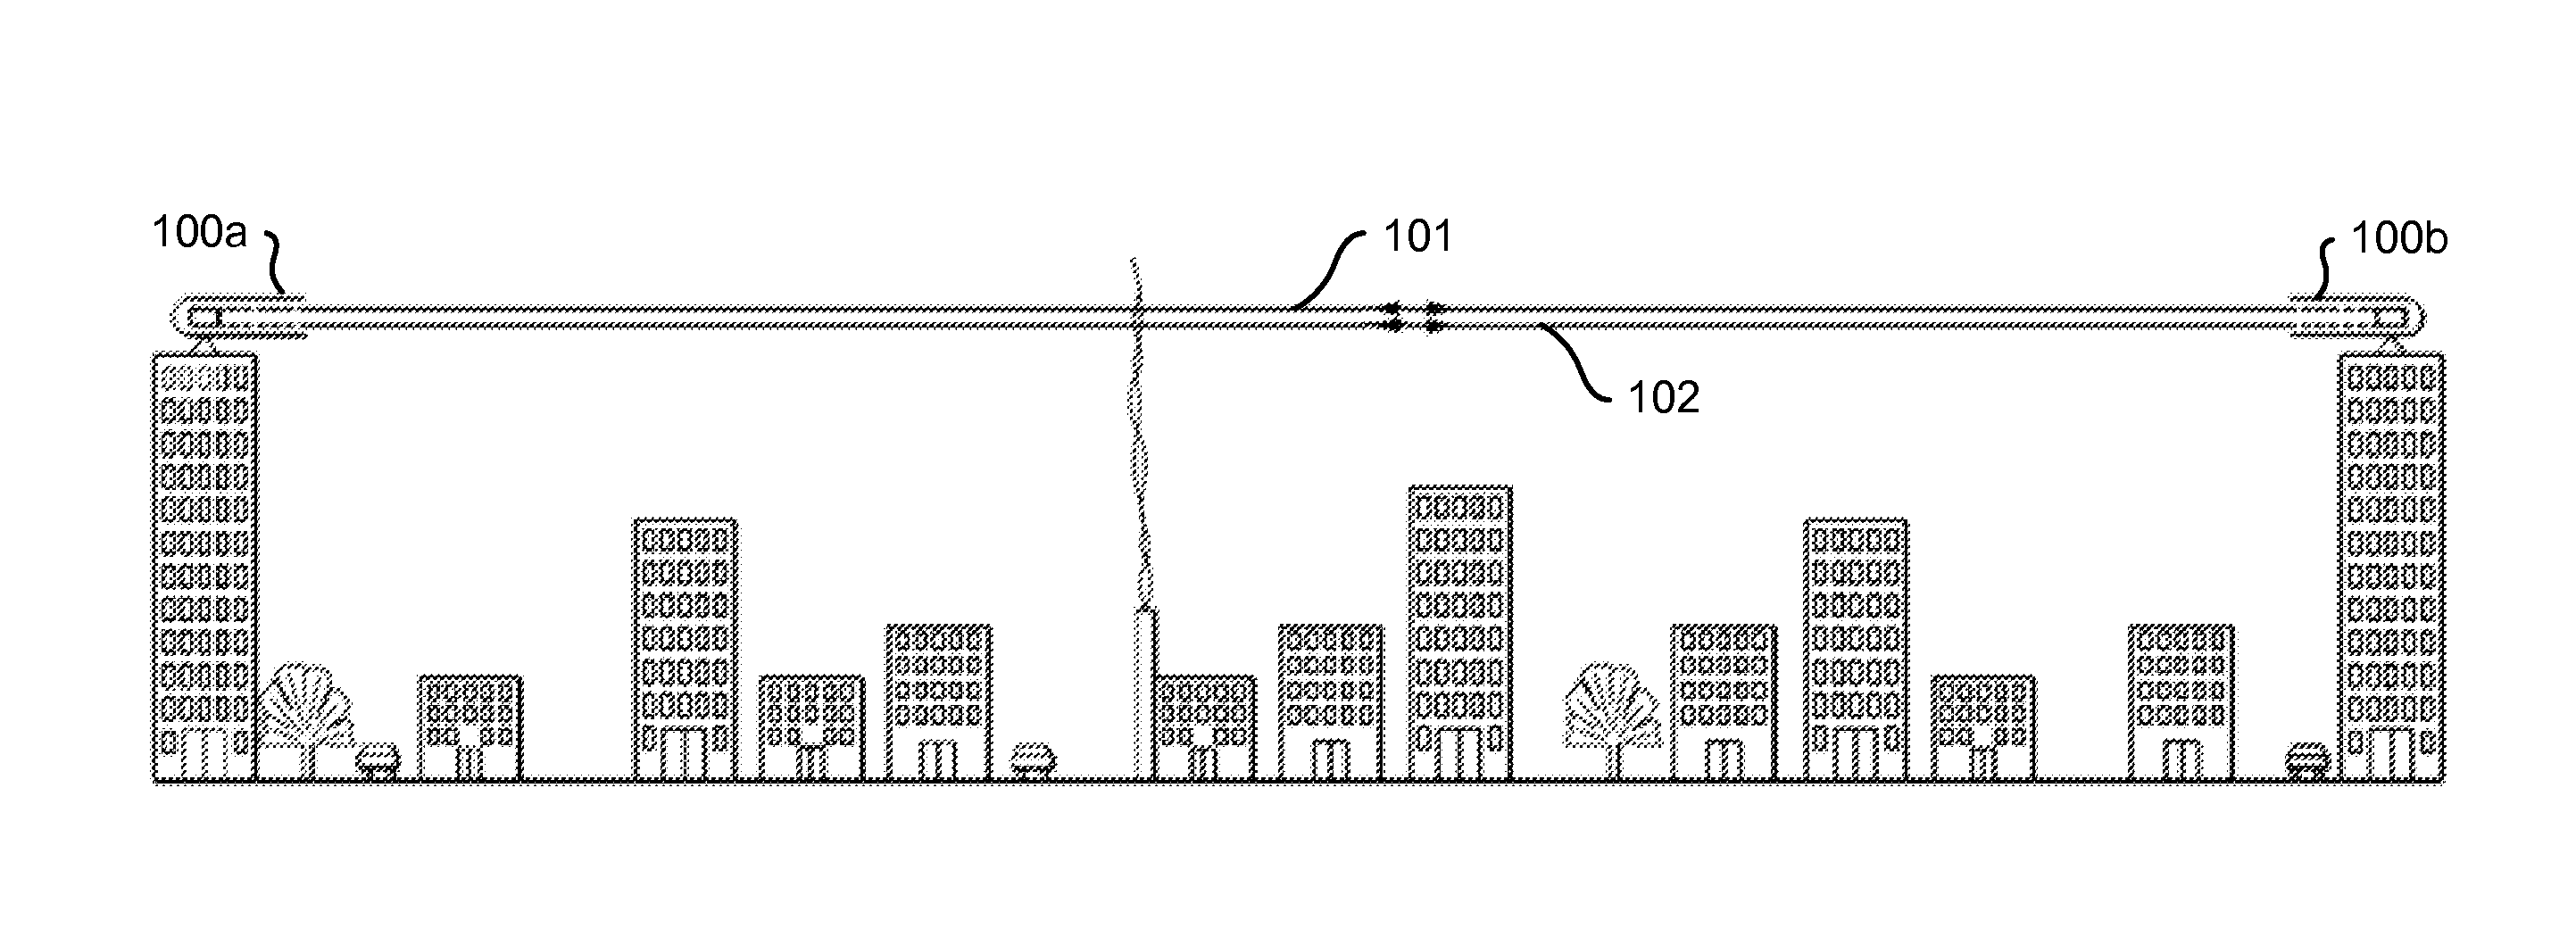 Integrated Commercial Communications Network Using Radio Frequency and Free Space Optical Data Communication